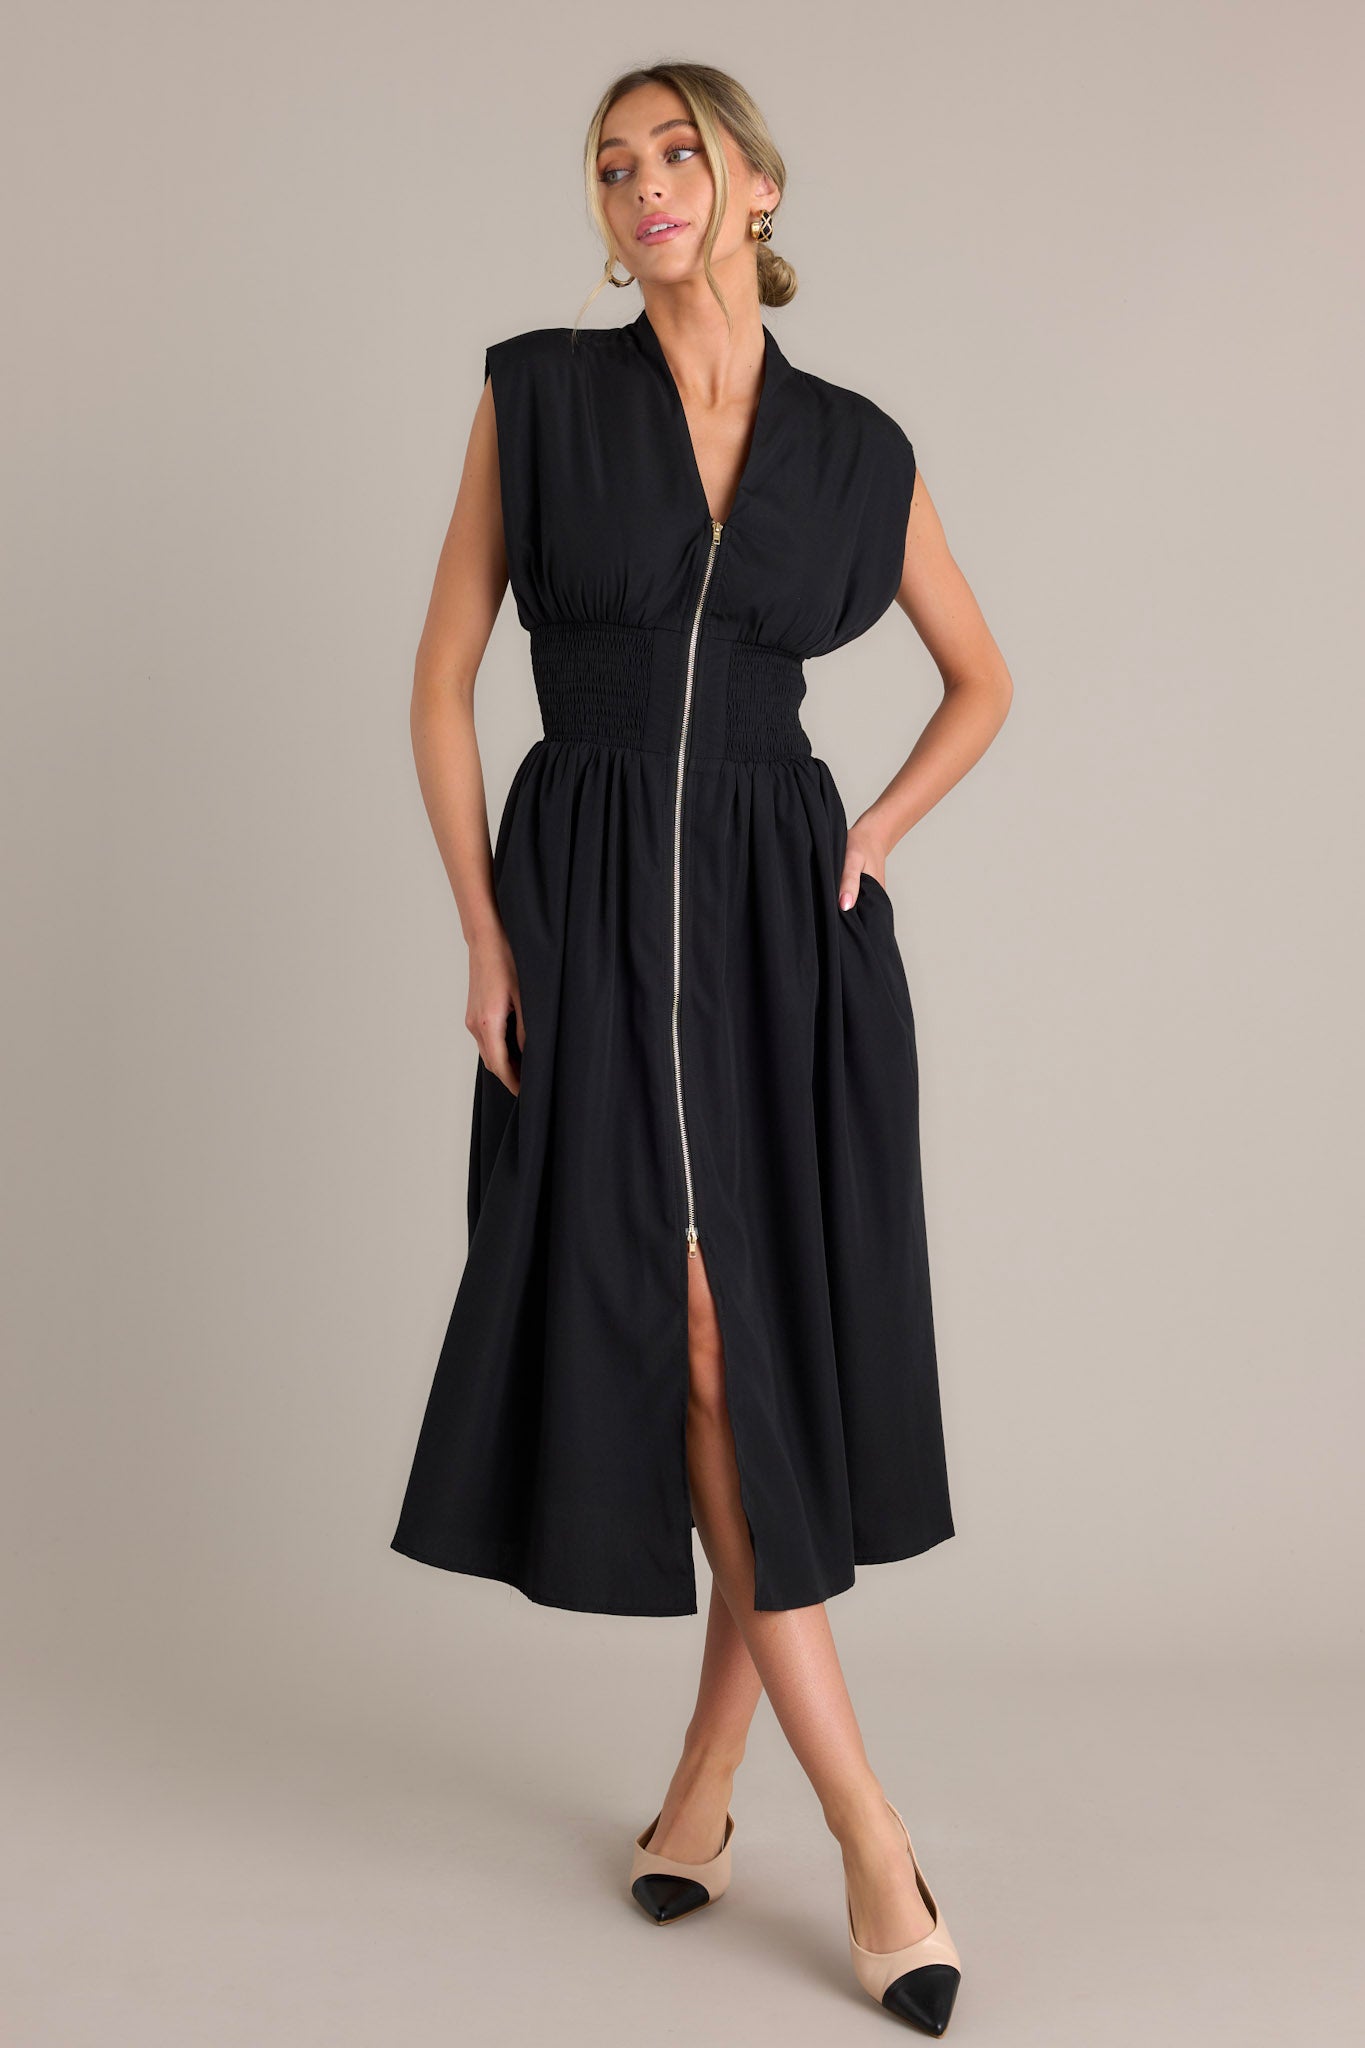 This black midi dress features a v-neckline, padded shoulders, a full zipper front, a fully smocked waist, functional hip pockets, and a front slit.